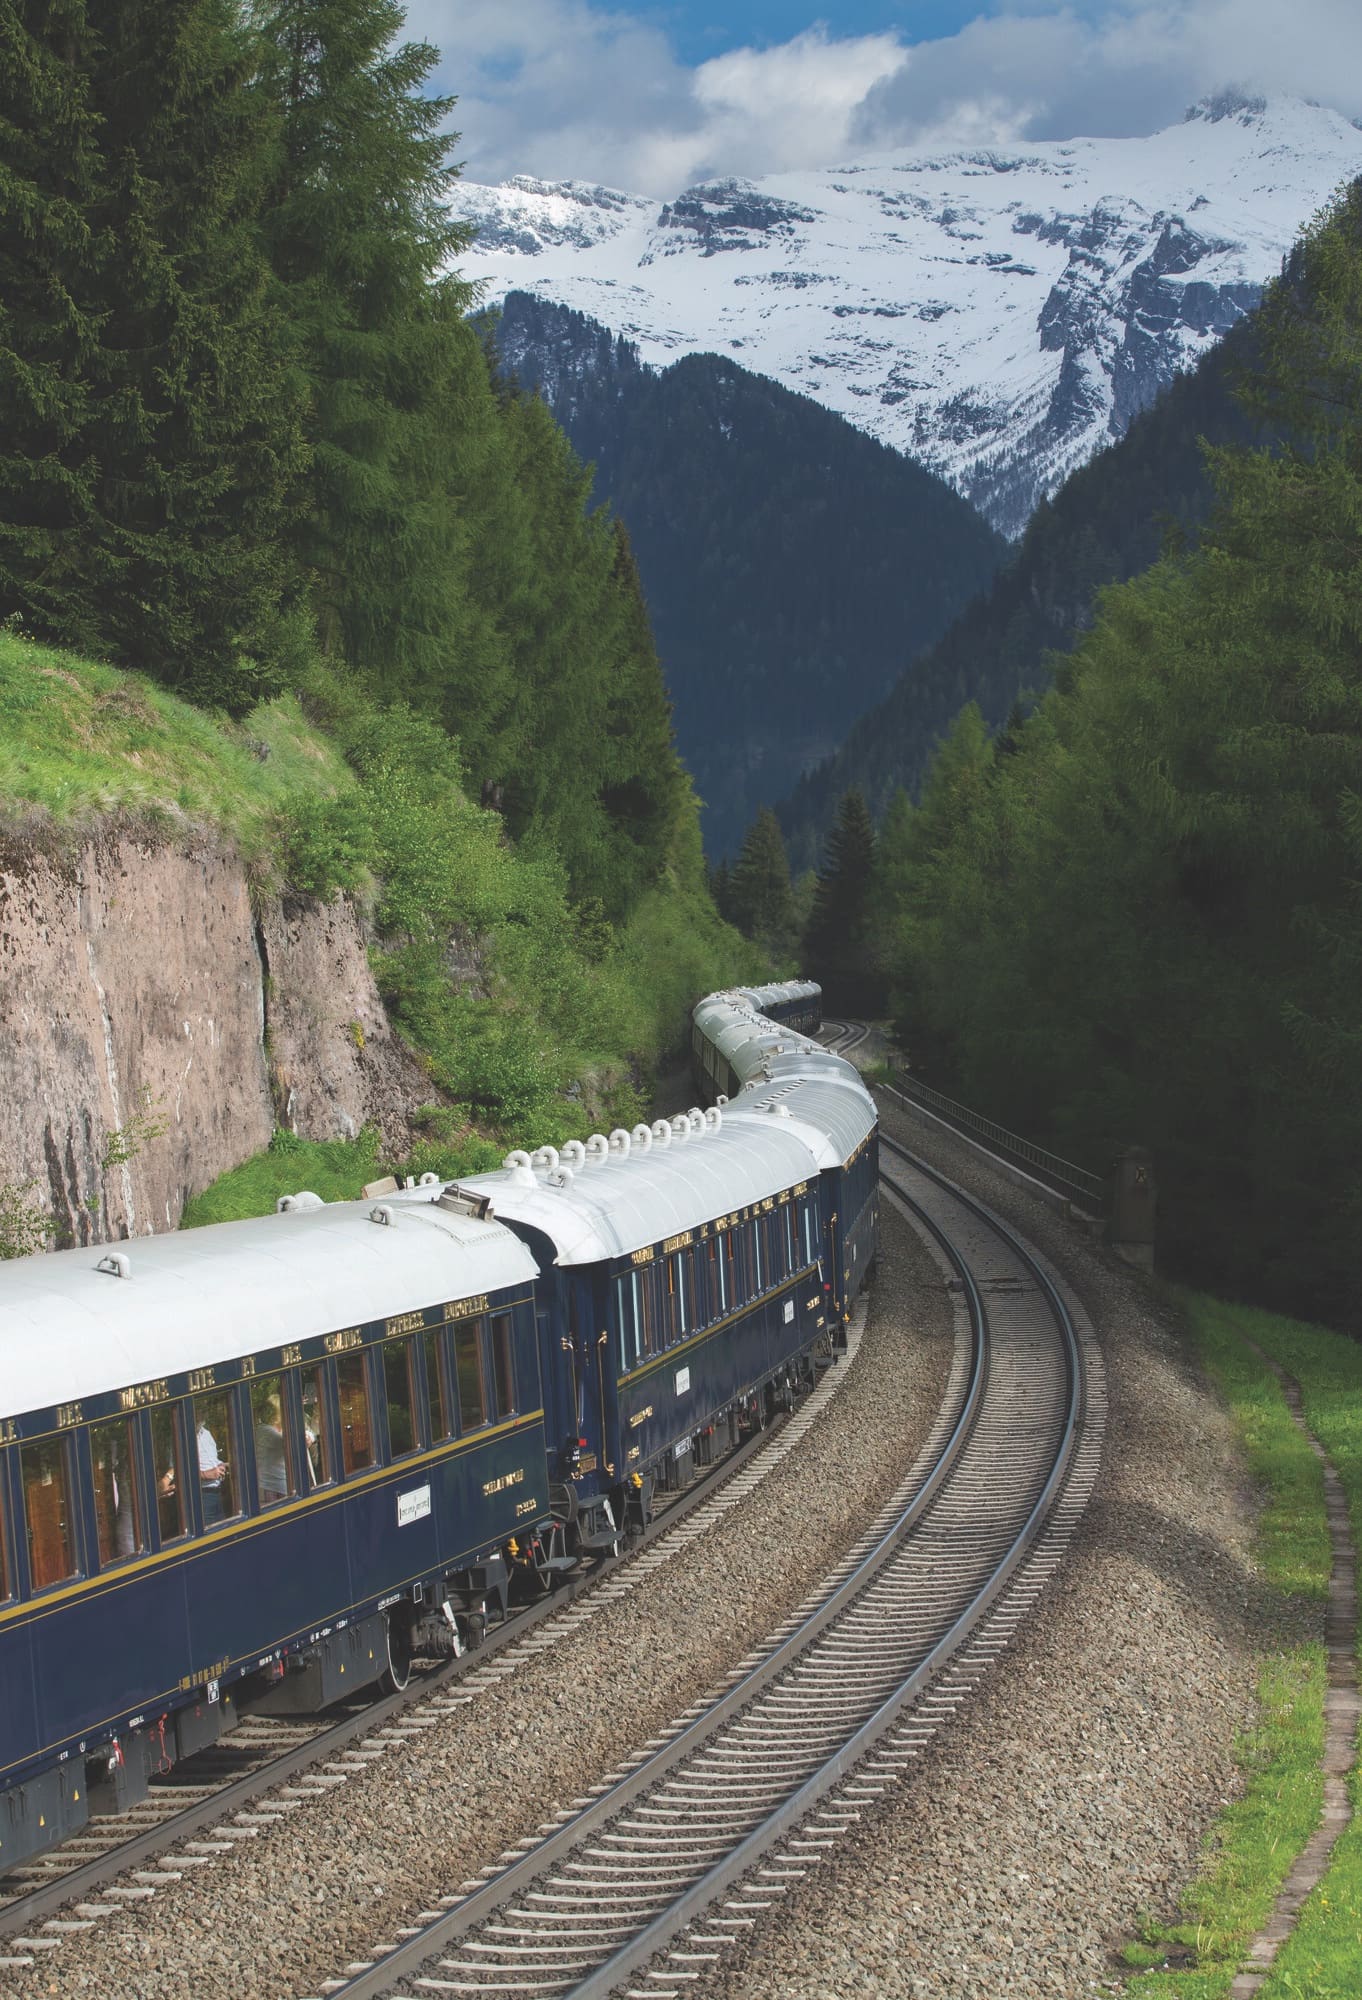 Ride The Orient Express Through Five New European Cities This Year